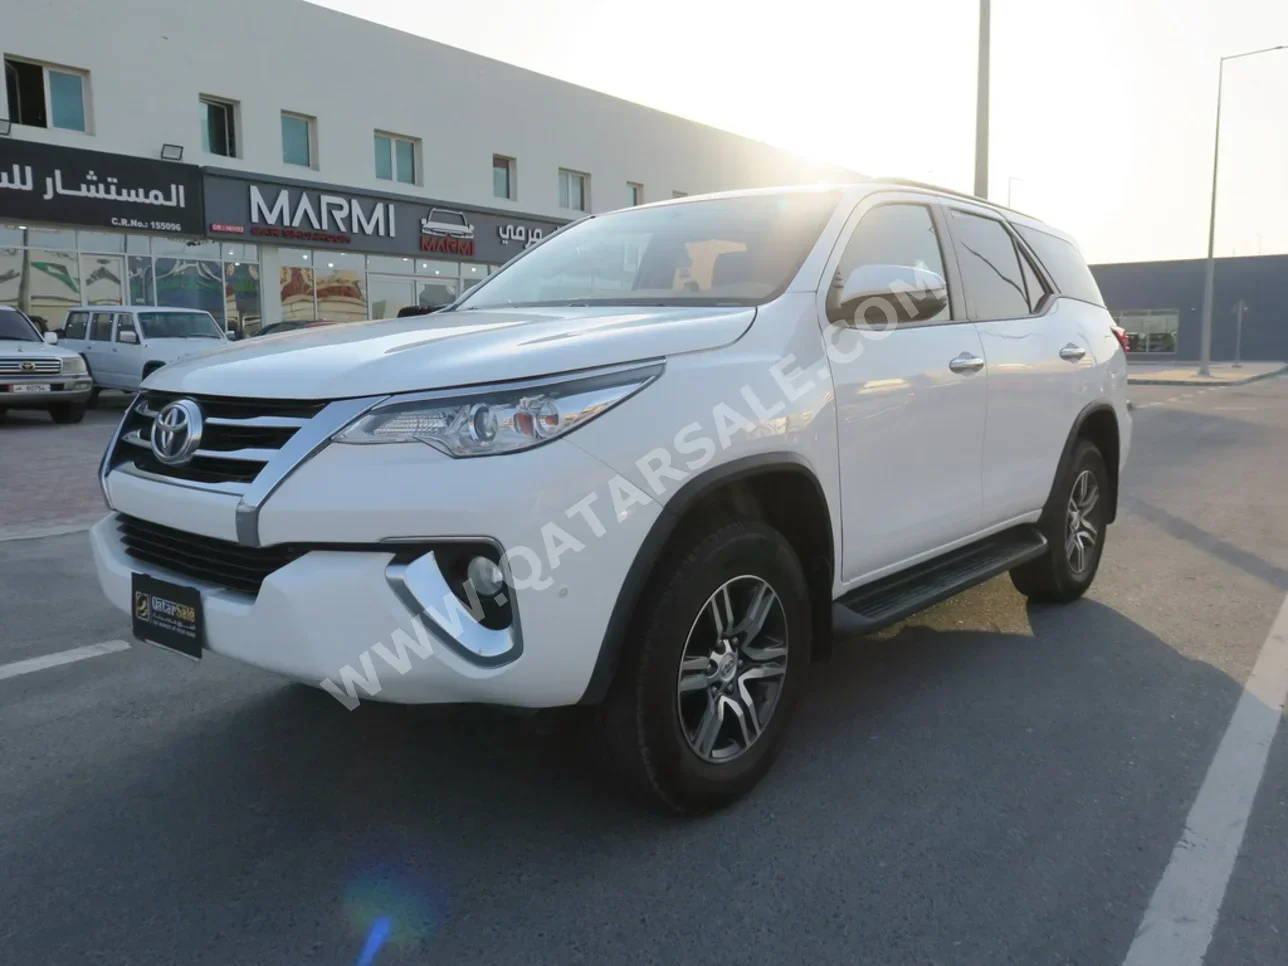 Toyota  Fortuner  2018  Automatic  115,000 Km  4 Cylinder  Four Wheel Drive (4WD)  SUV  White